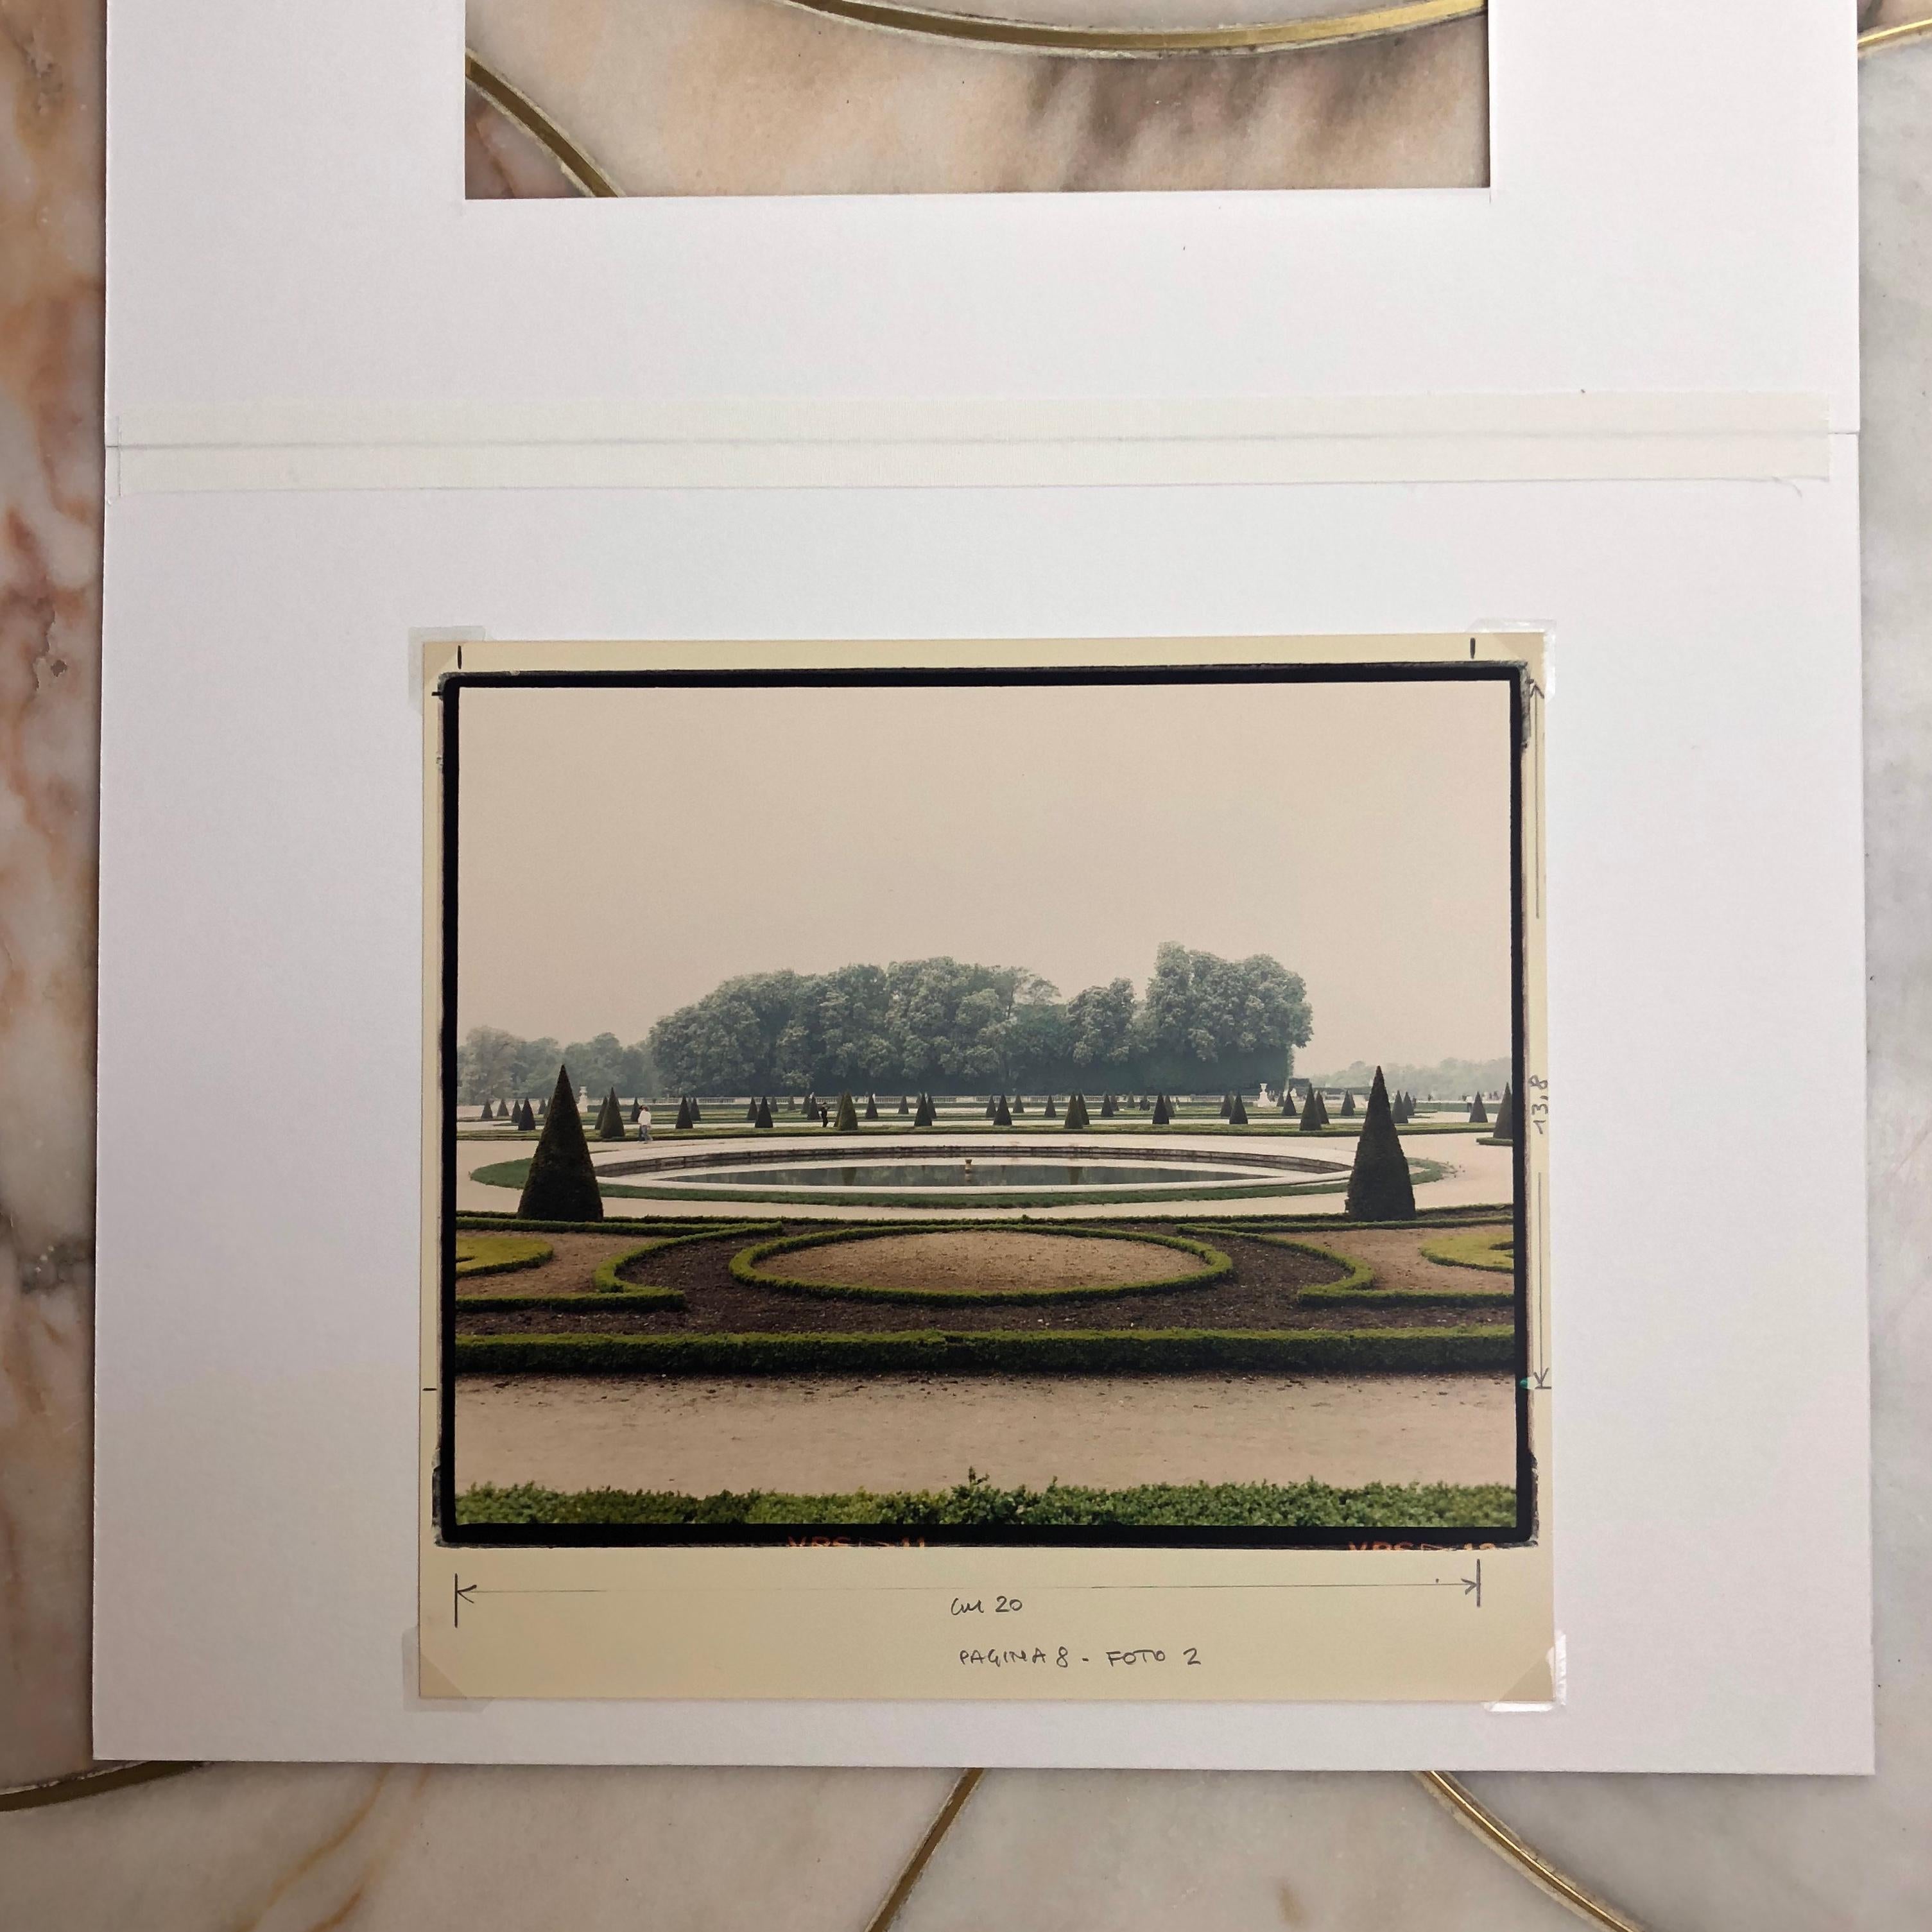 Luigi Ghirri (5 January 1943 – 14 February 1992) was an Italian artist and photographer who gained a far-reaching reputation as a pioneer and master of contemporary photography, with particular reference to its relationship between fiction and